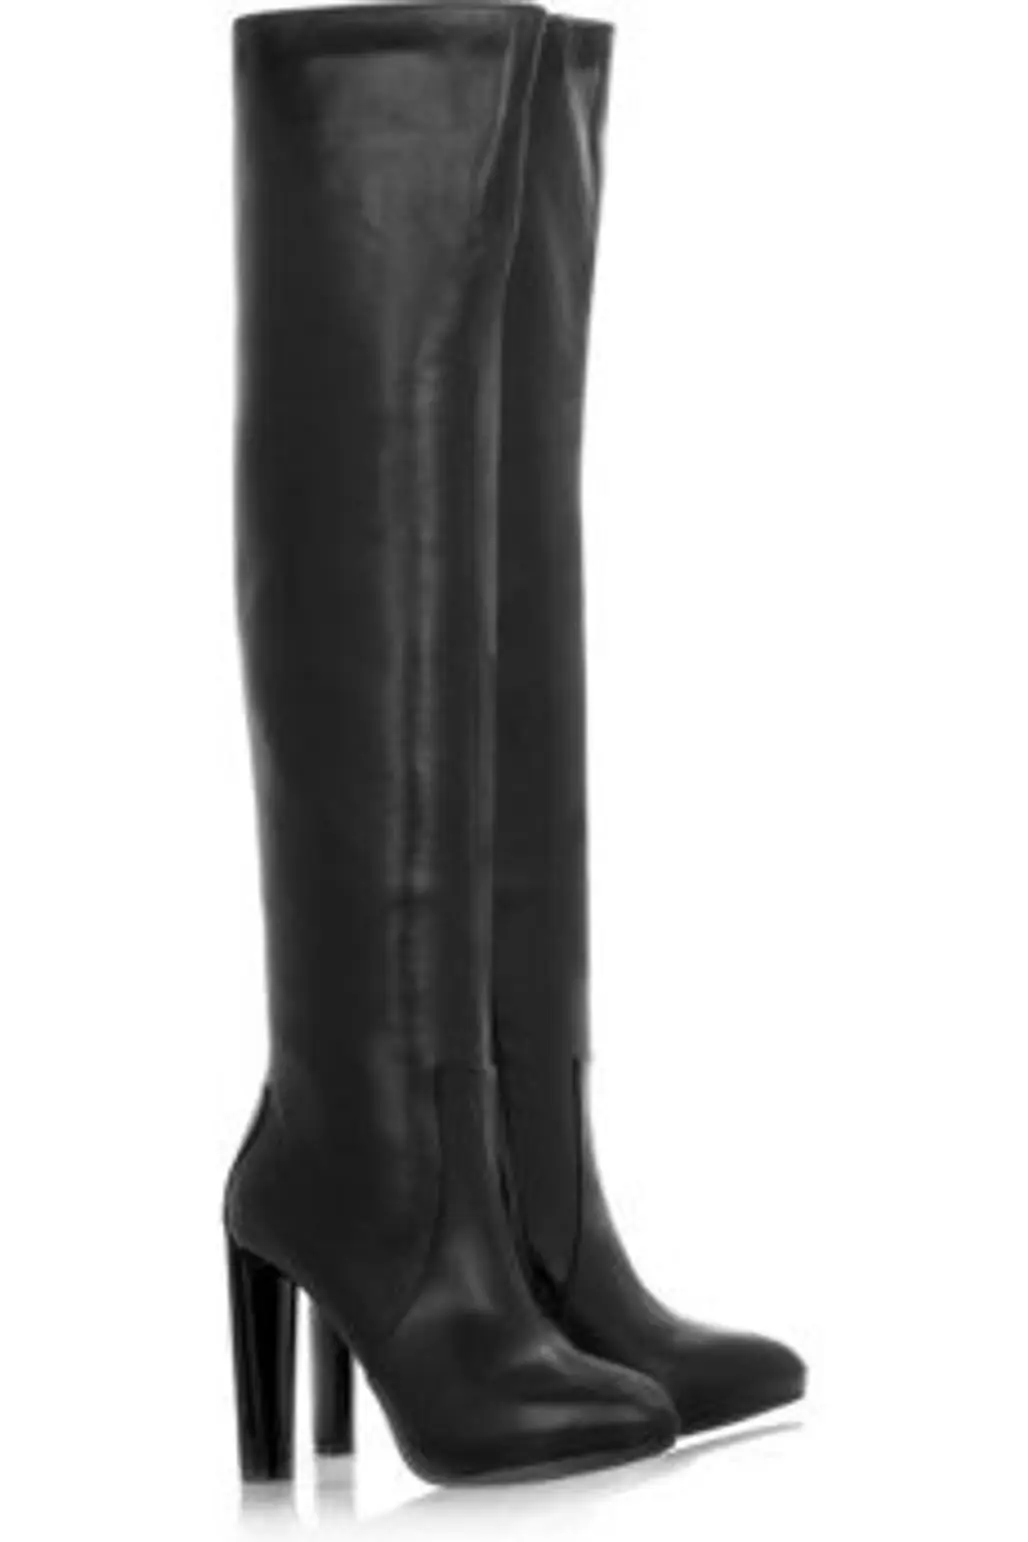 Celine Leather over the Knee Boots